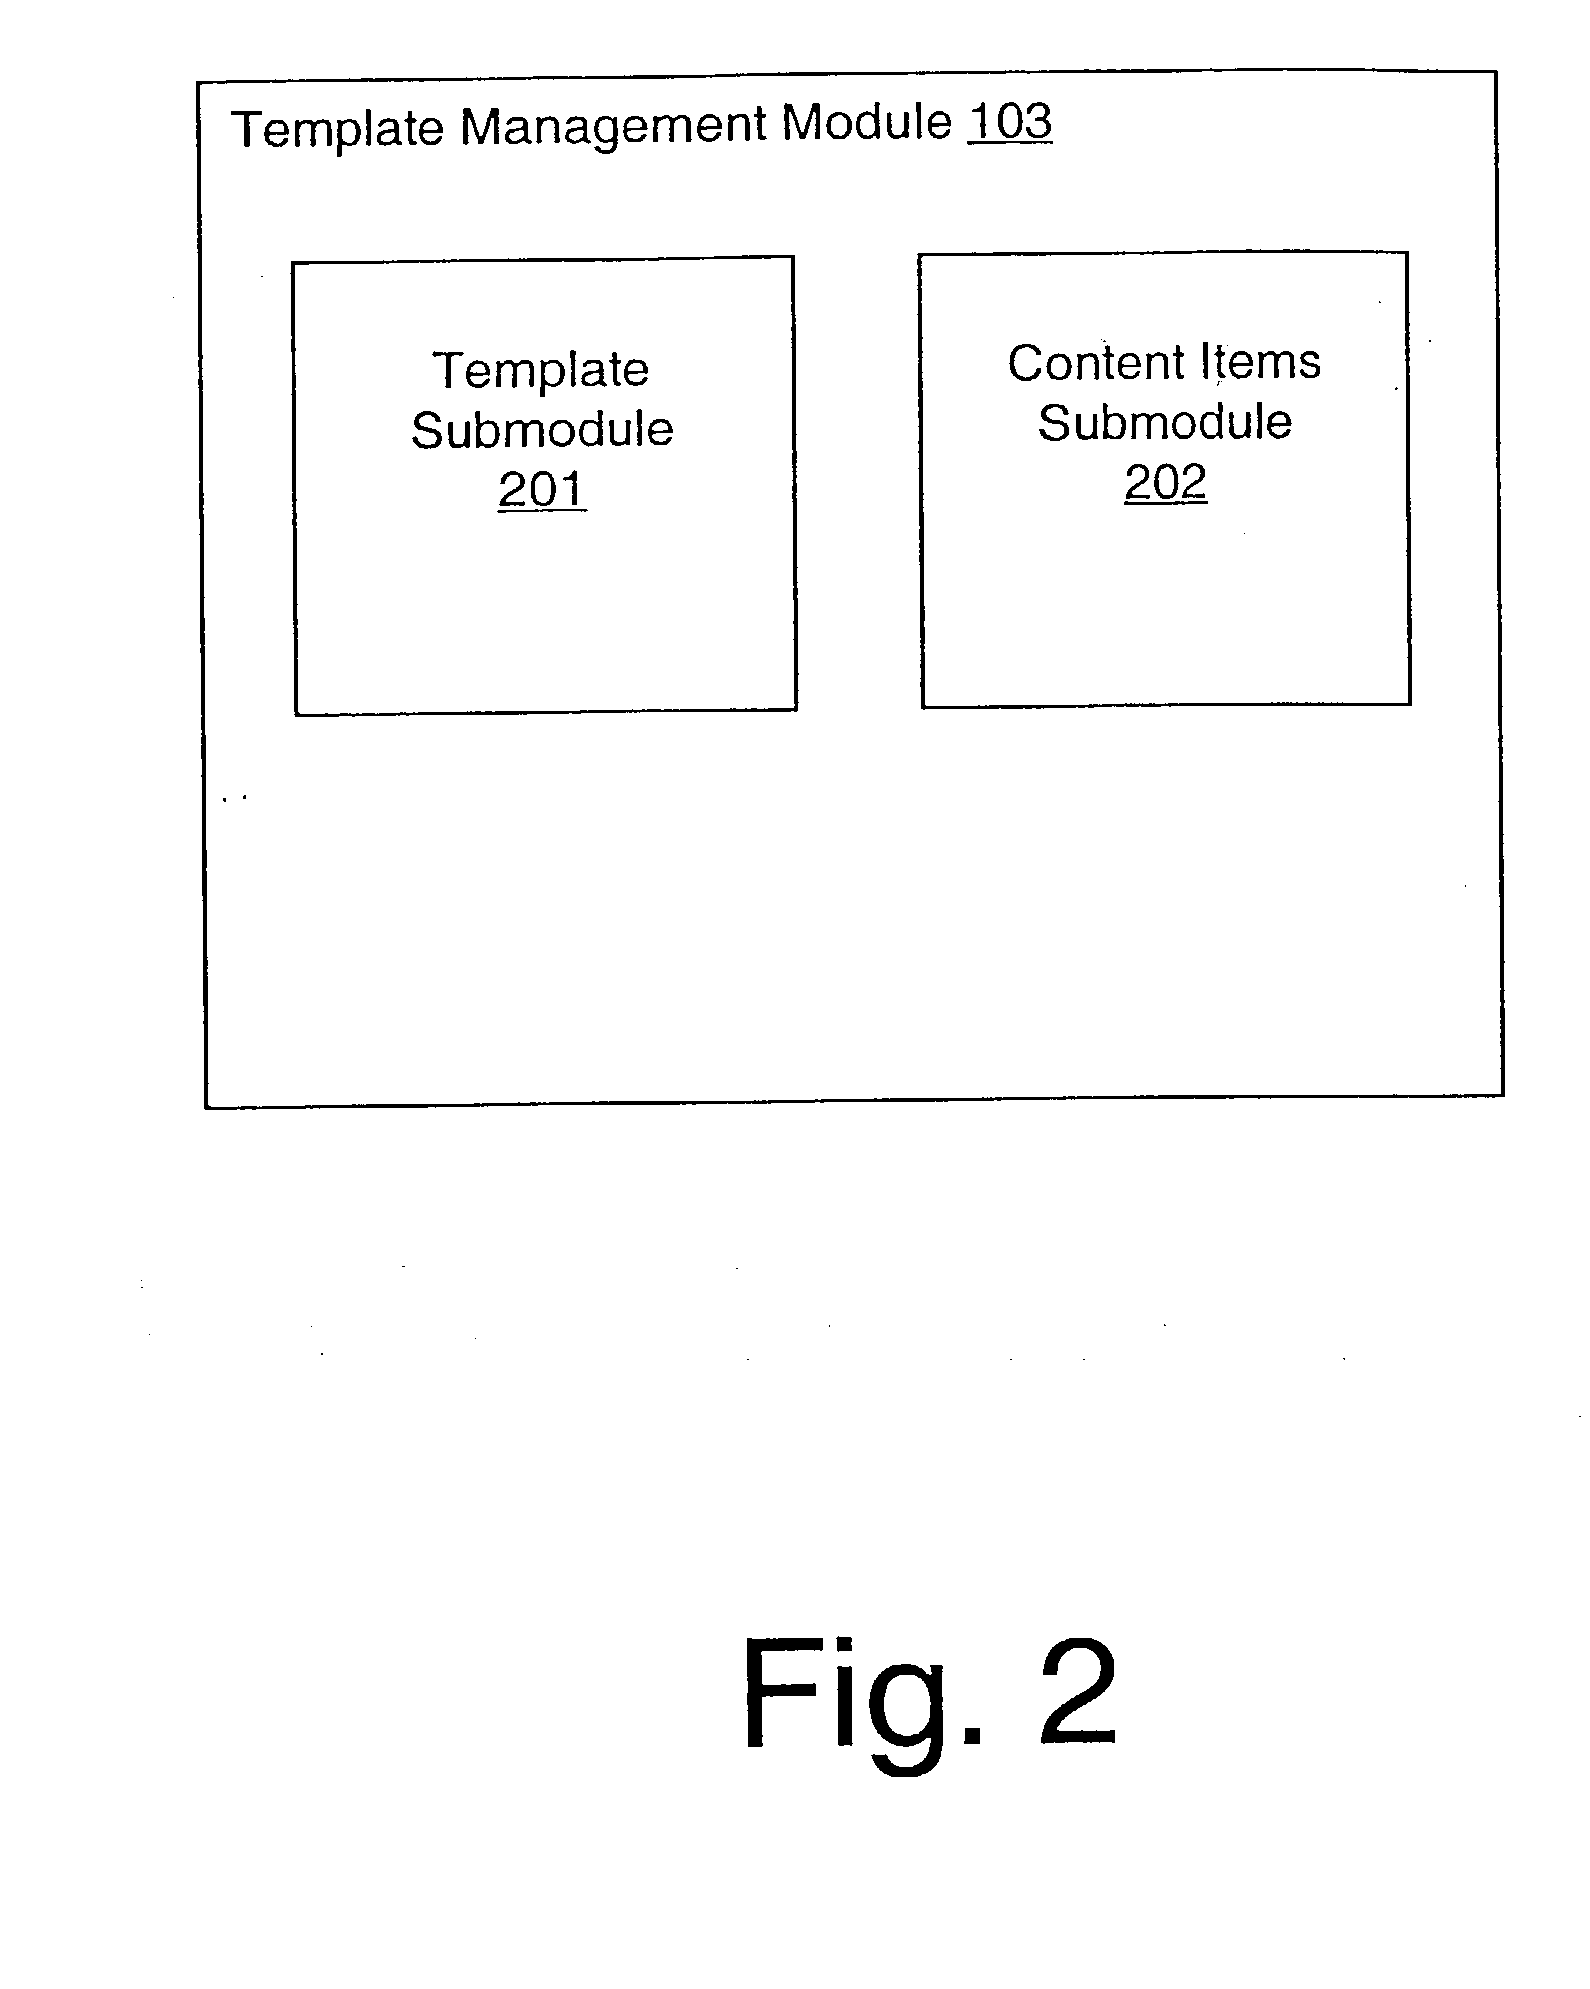 Architecture and method for bill presentment using a web-based tool